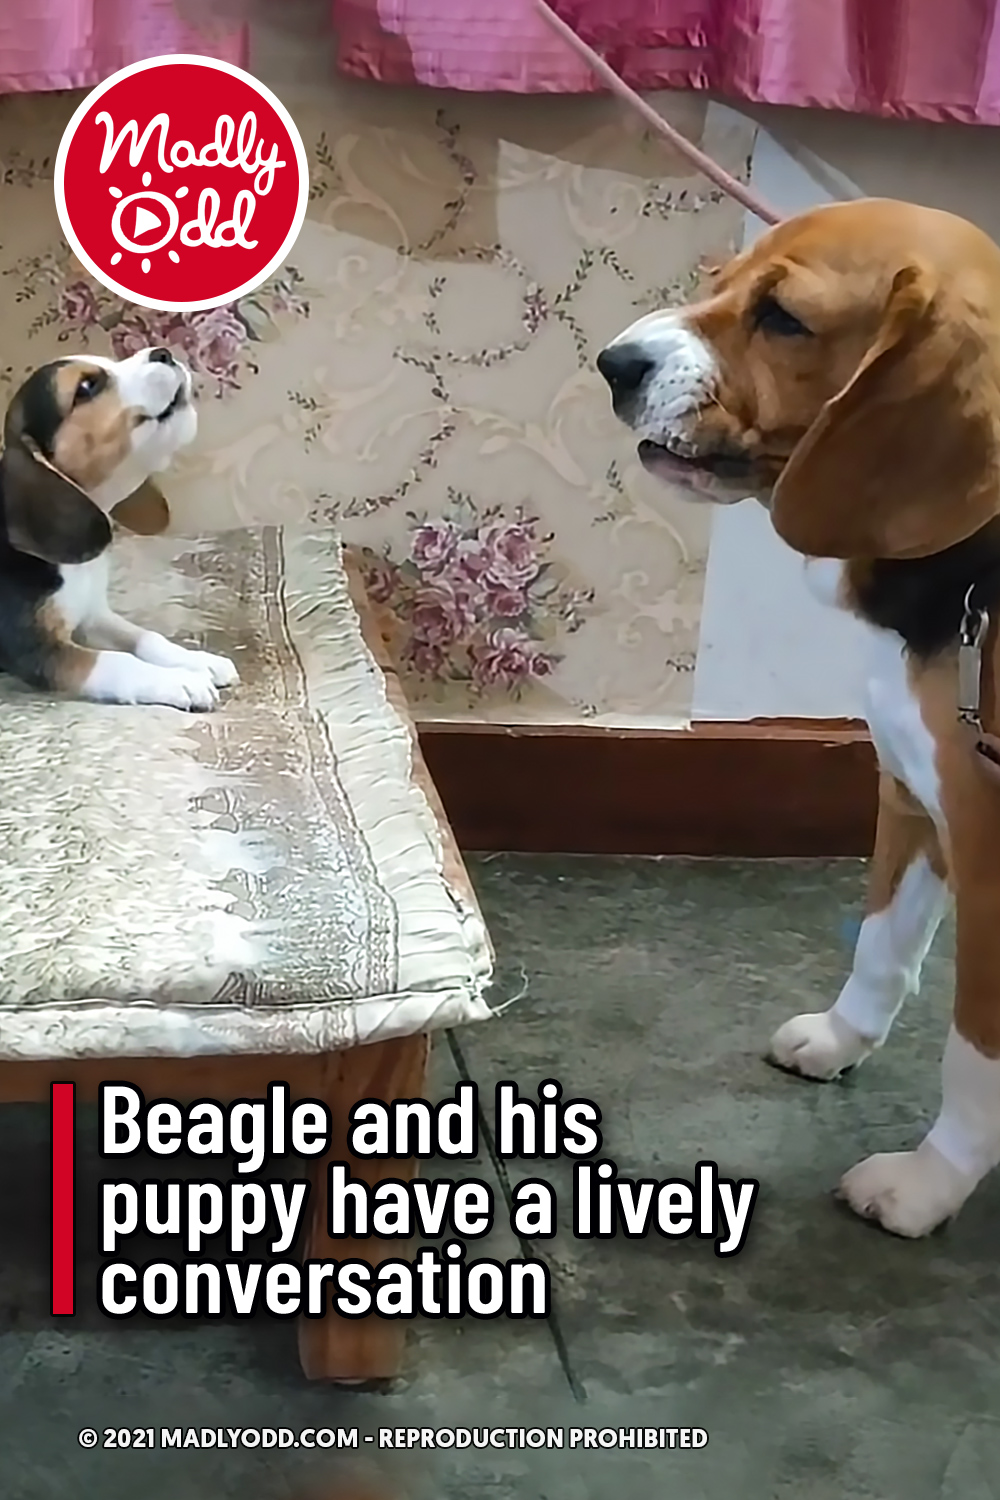 Beagle and his puppy have a lively conversation